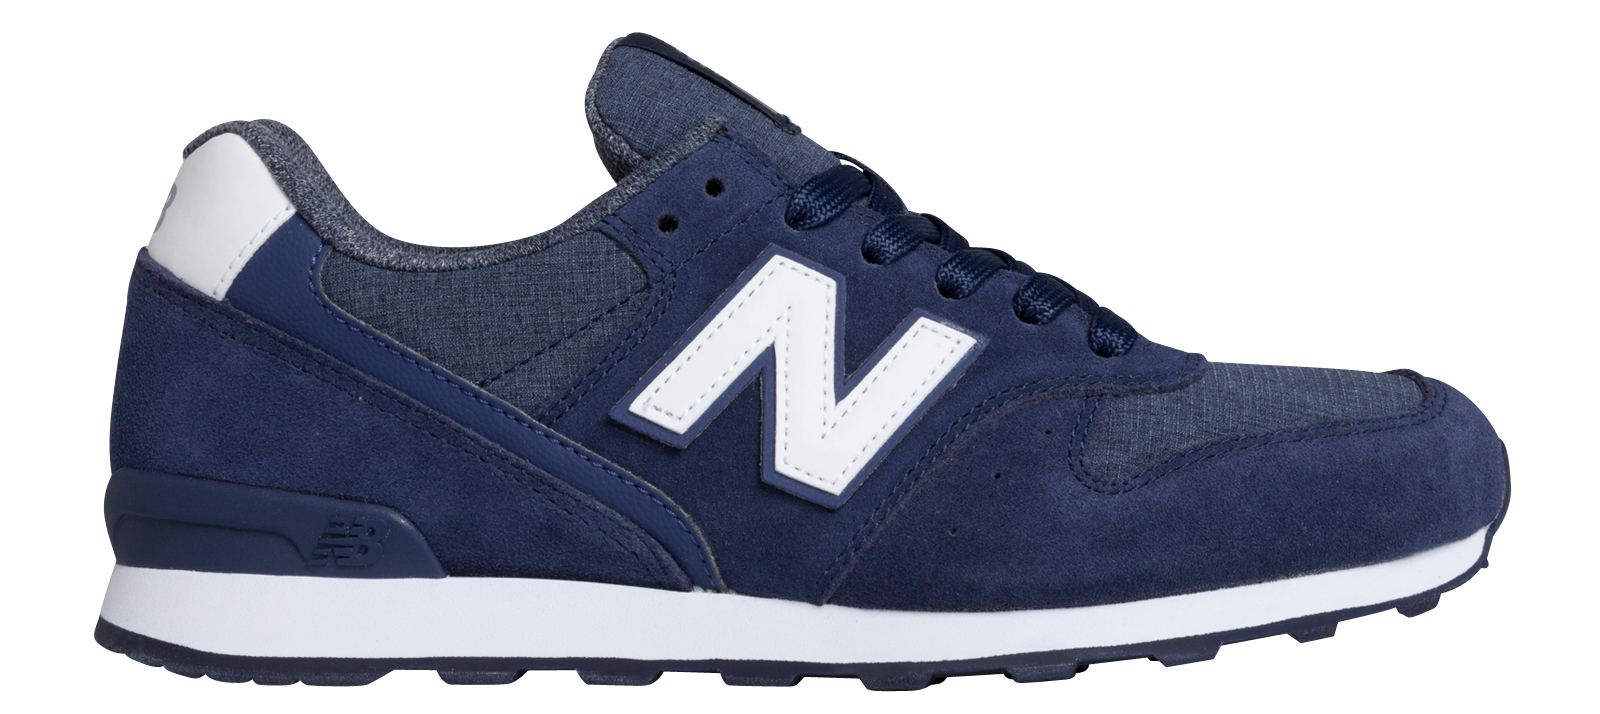 See a Ton of New Balance Retros Releasing Next Month Here | Sole Collector